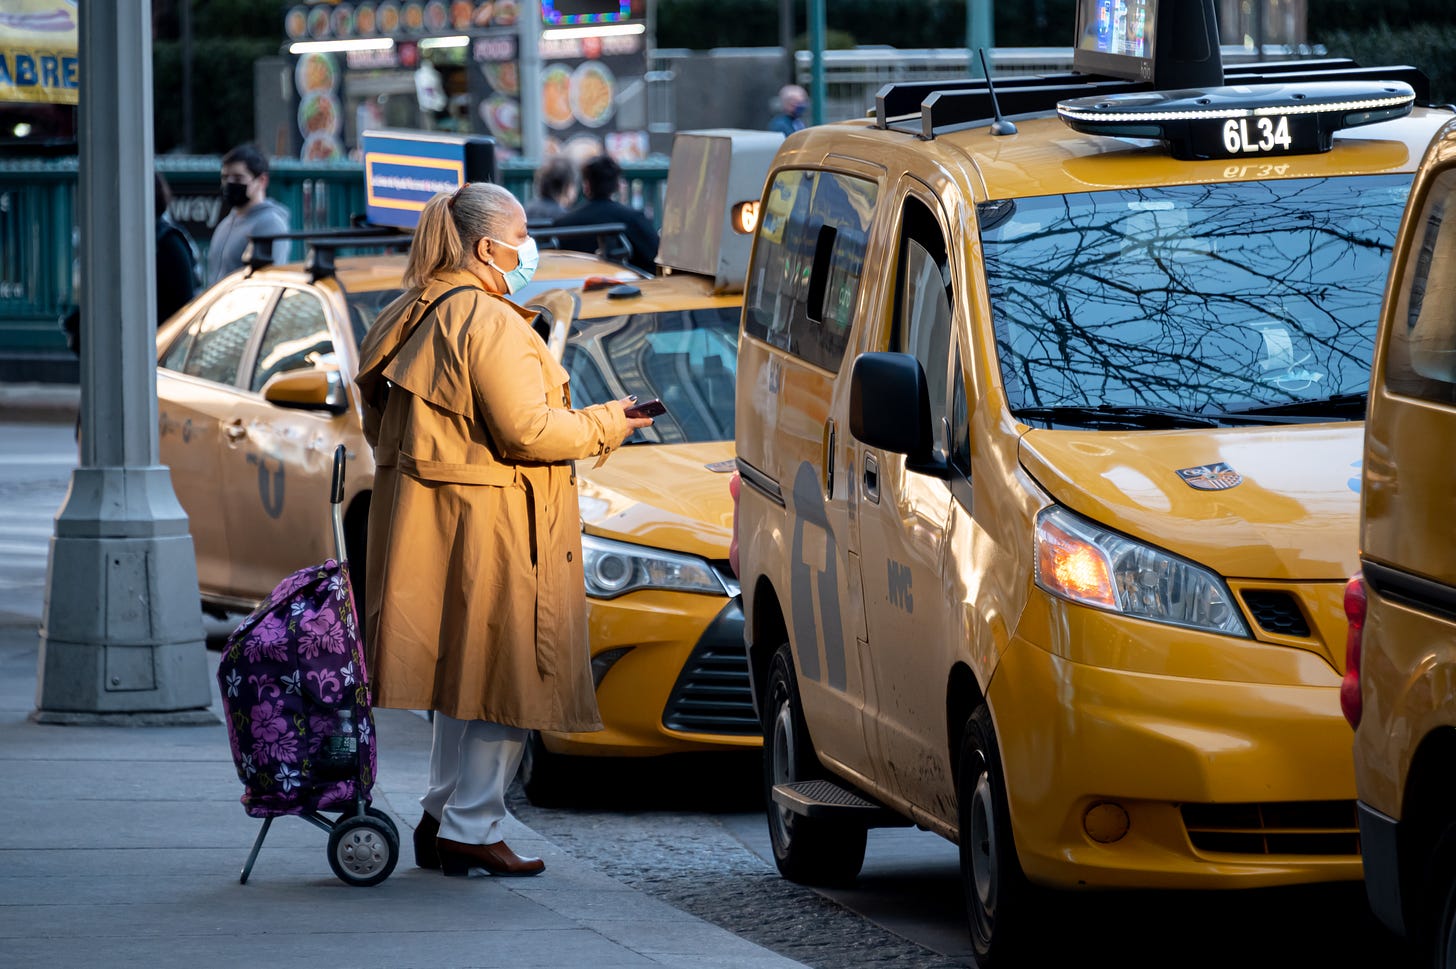 A rider enters a yellow cab in New York City in March 2021.